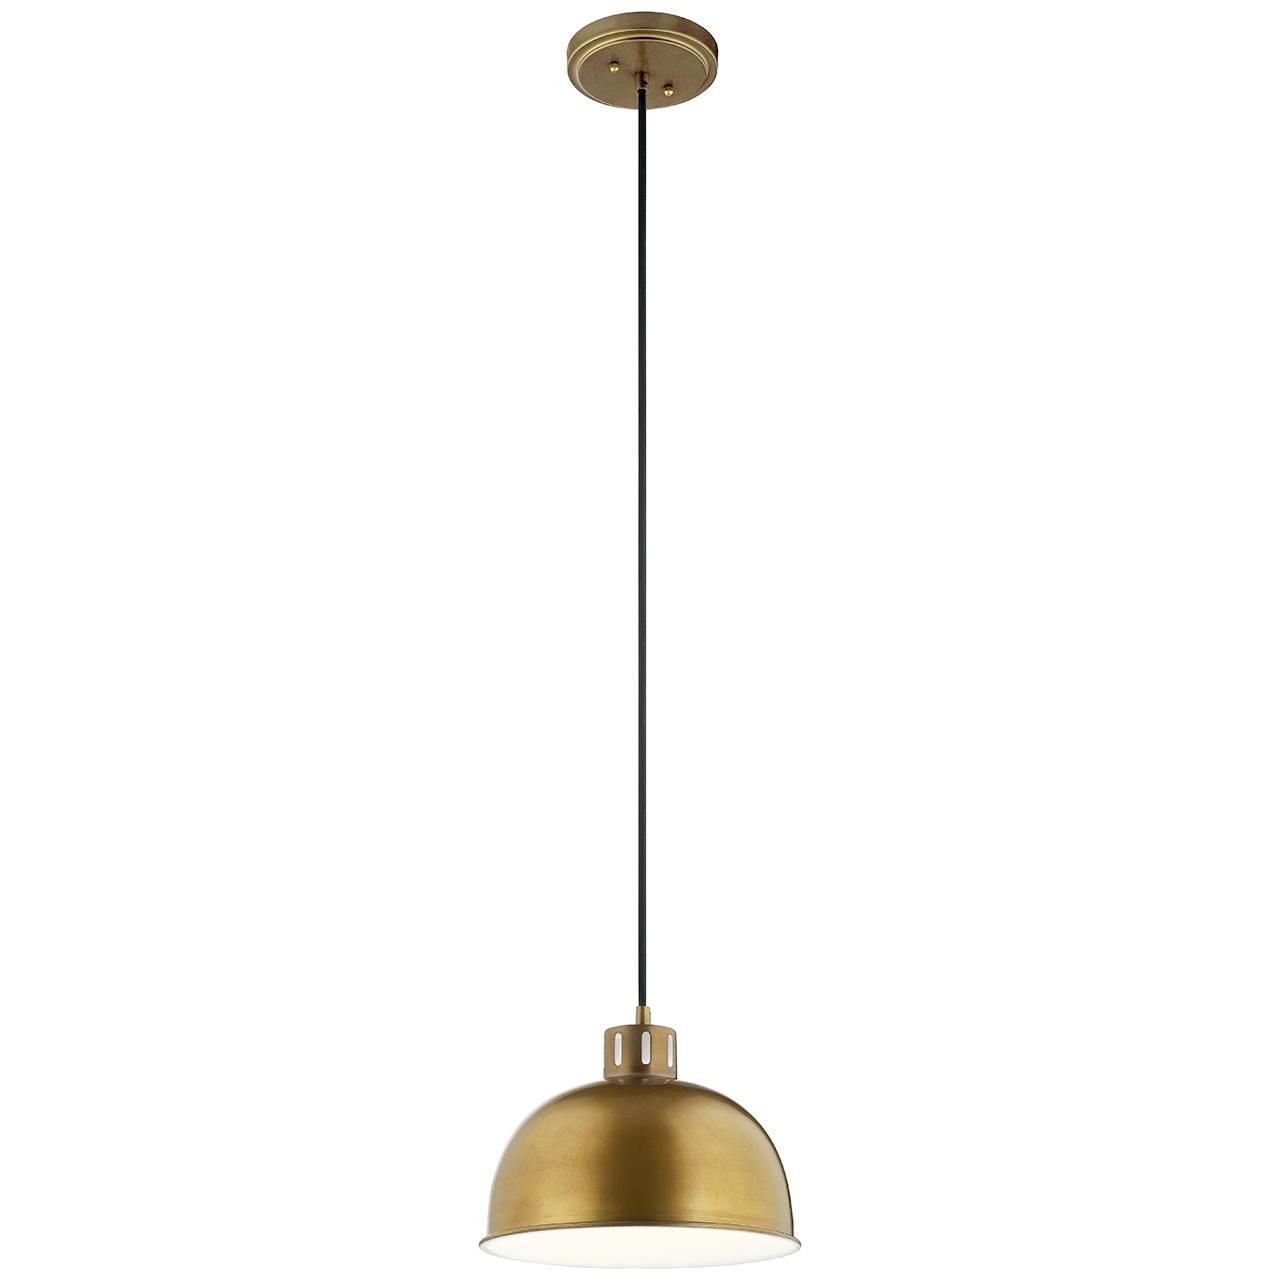 Zailey 9" 1 Light Pendant in Brass on a white background